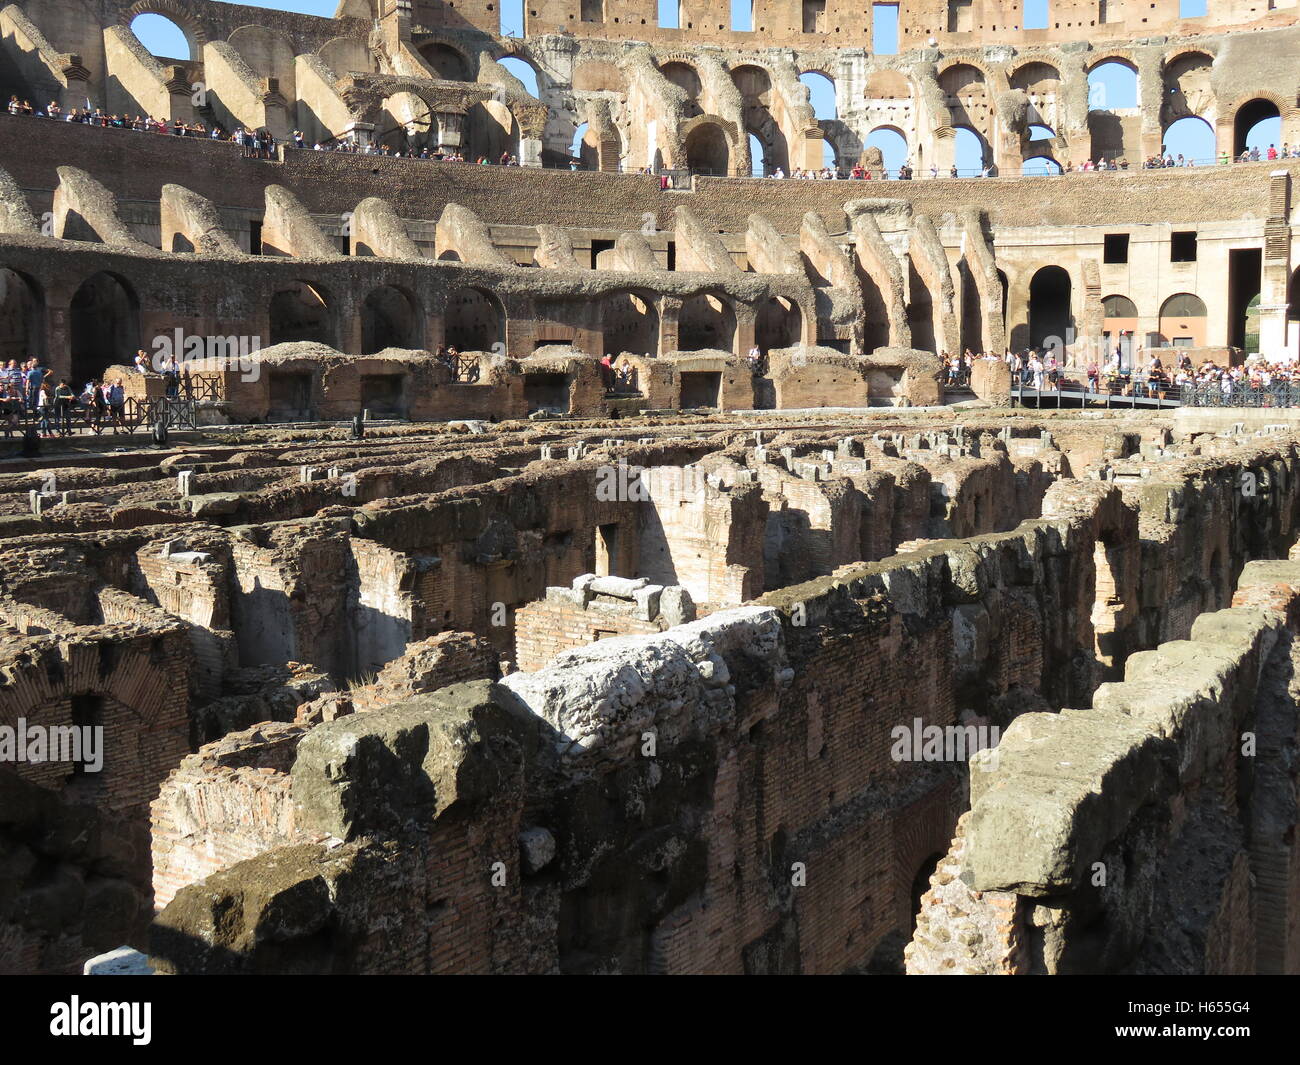 Interior of Colosseum with tourists Stock Photo